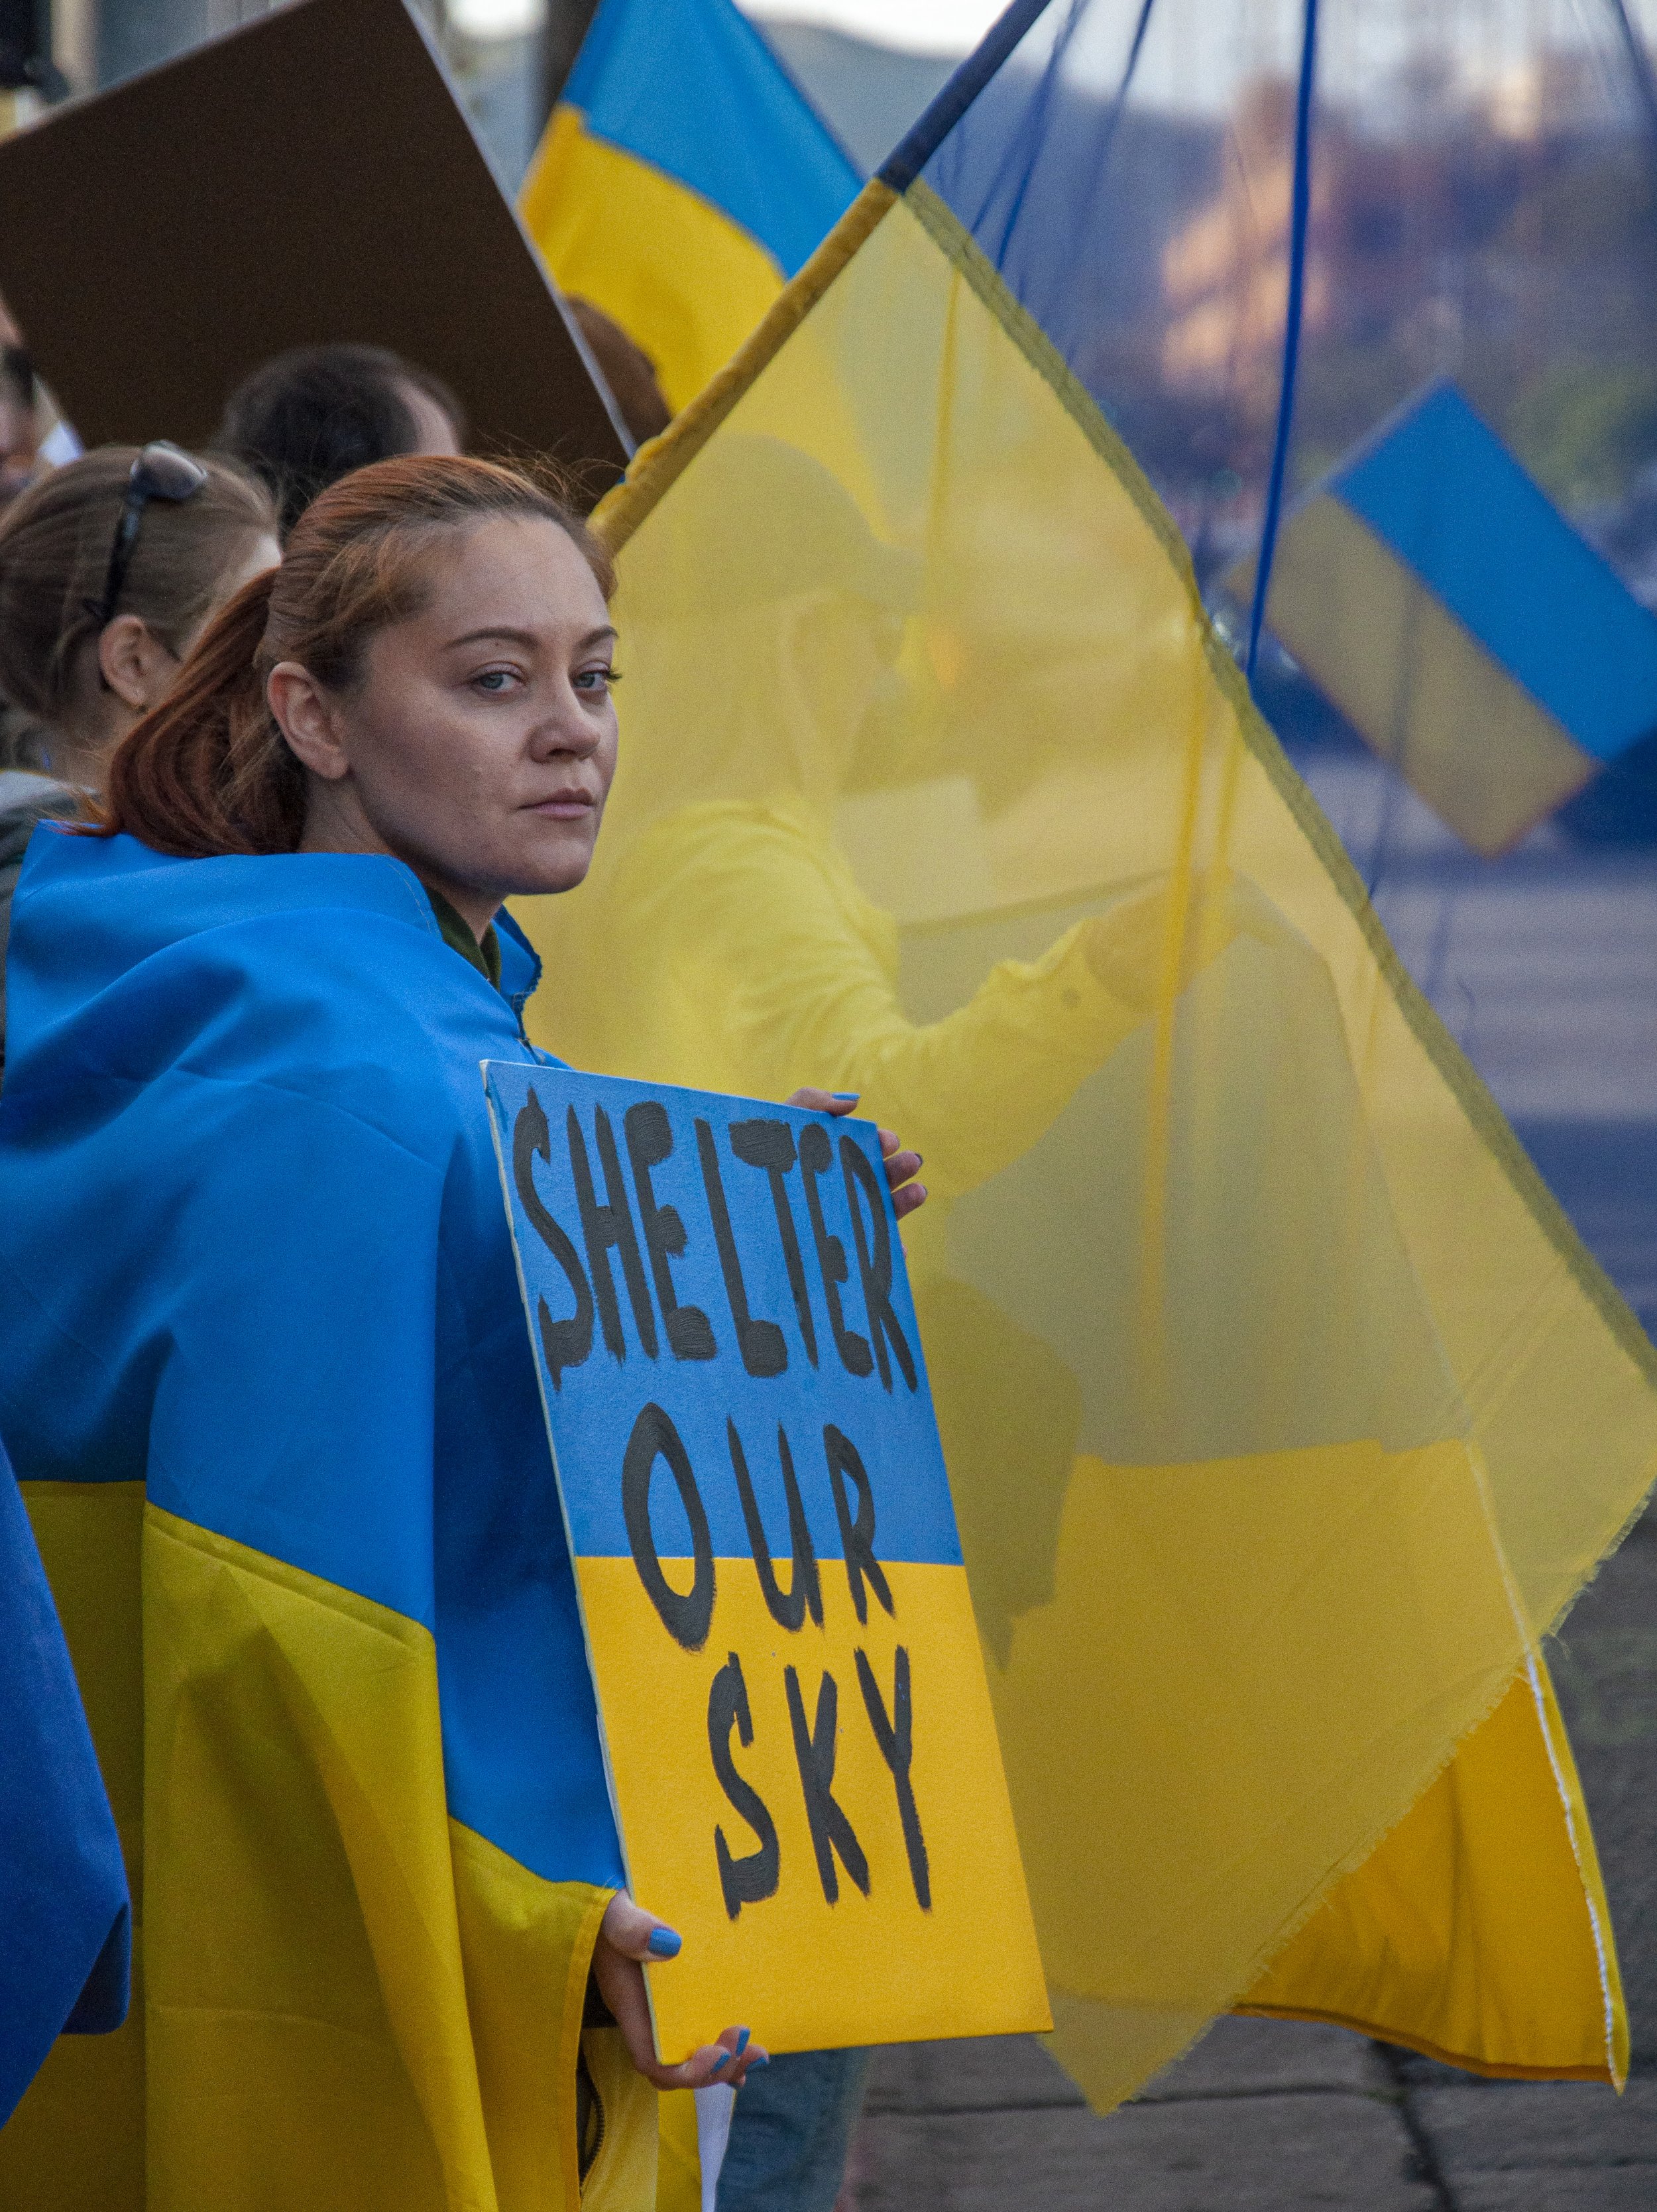  Maryna Omelchenko holding a sign that says "Shelter Our Sky" at the "Support Ukraine" protest on Feb. 26, at 11111 Santa Monica Blvd located in Los Angeles (Forrest Flanders | The Corsair) 